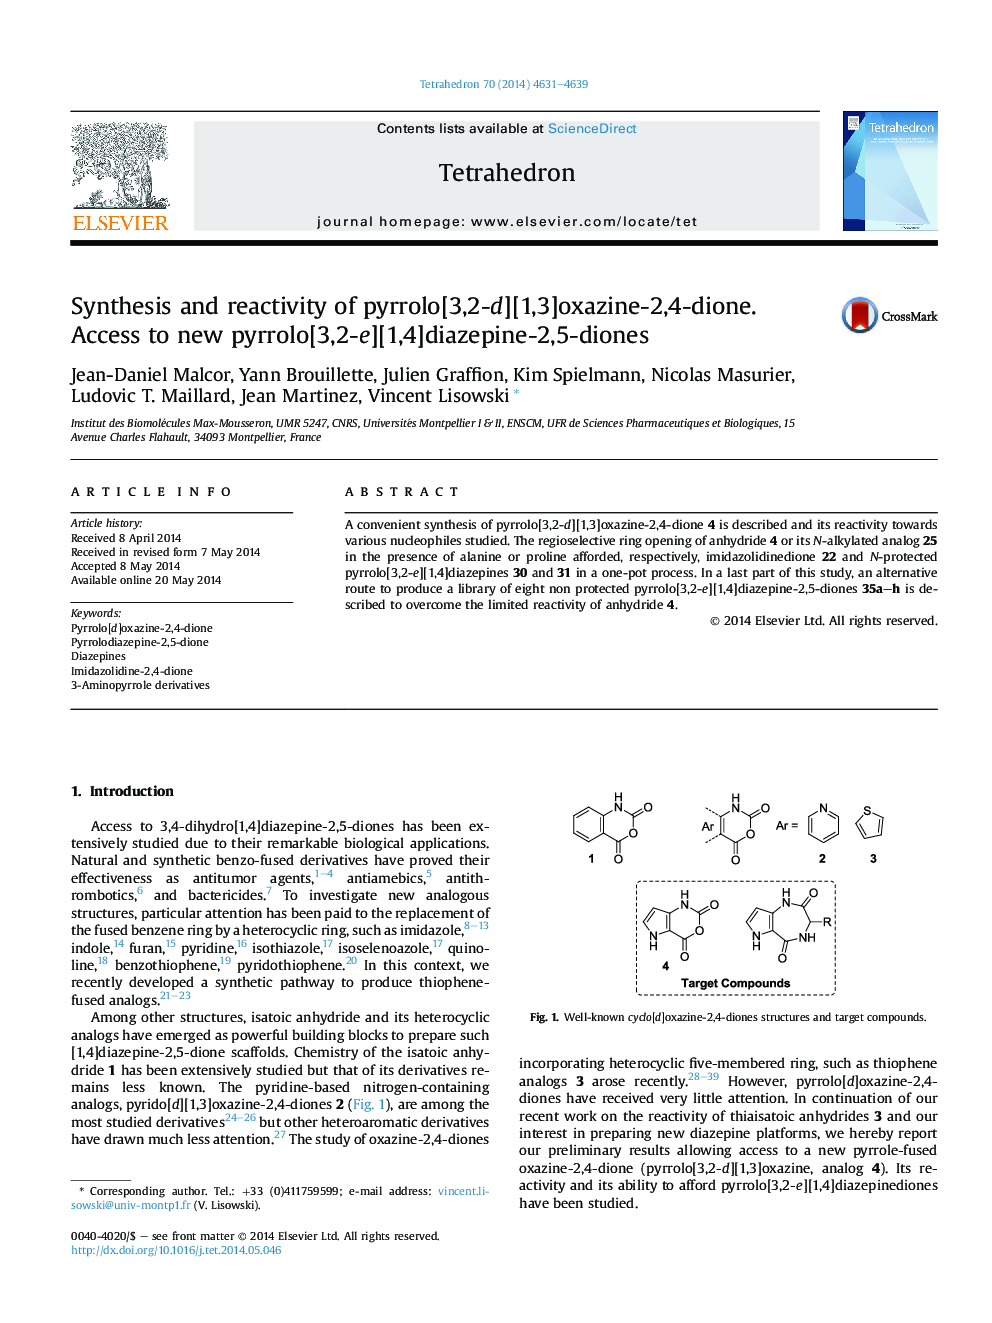 Synthesis and reactivity of pyrrolo[3,2-d][1,3]oxazine-2,4-dione. Access to new pyrrolo[3,2-e][1,4]diazepine-2,5-diones